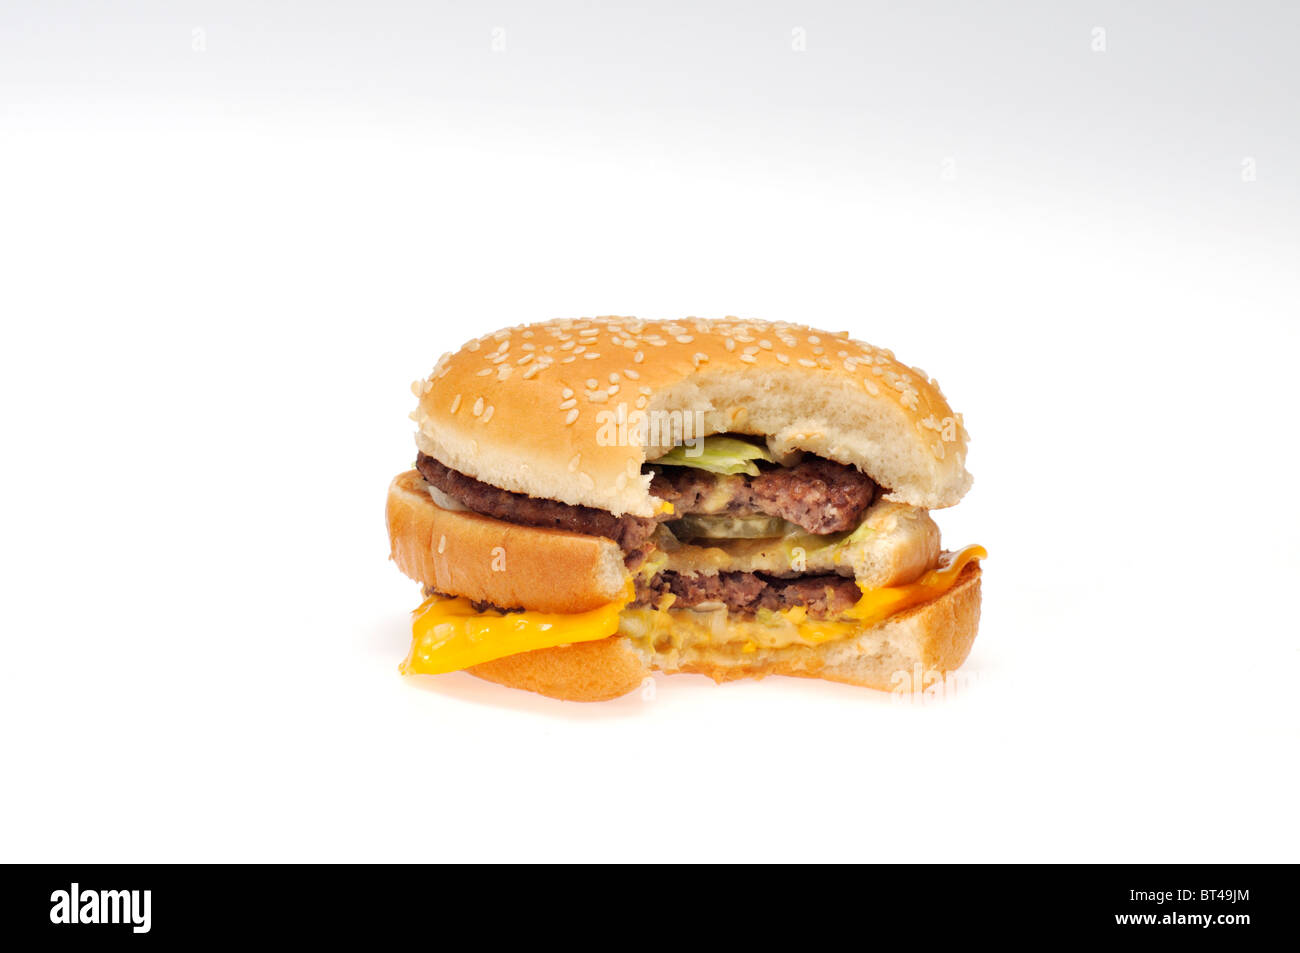 McDonald's Big Mac double cheeseburger that has a bite out of it on white background cut out. Stock Photo